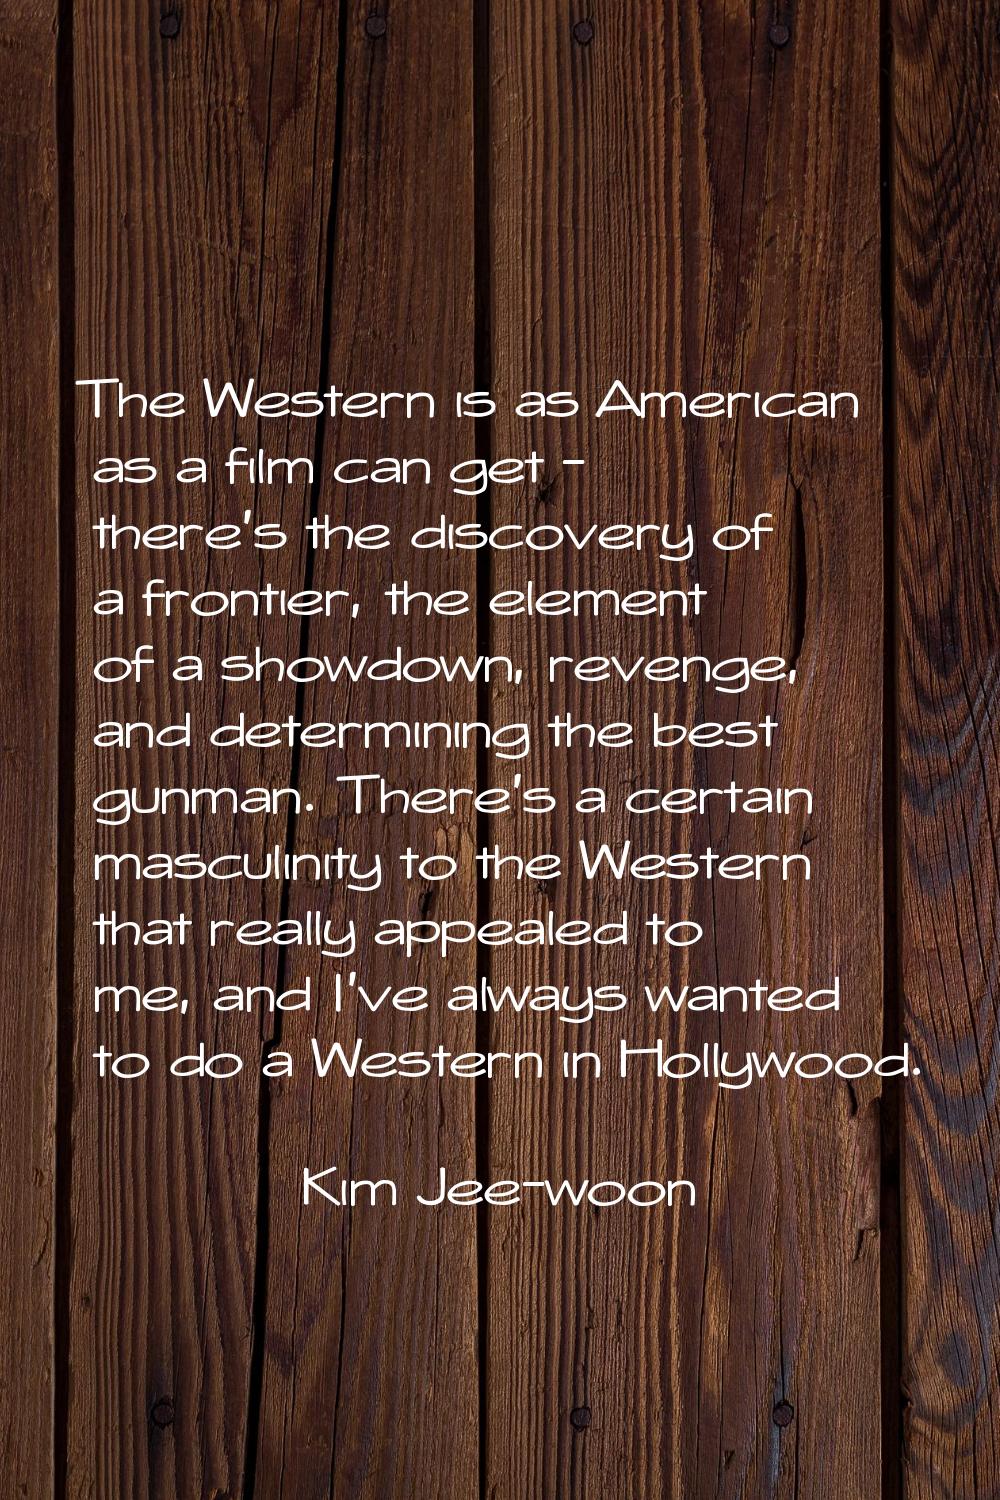 The Western is as American as a film can get - there's the discovery of a frontier, the element of 